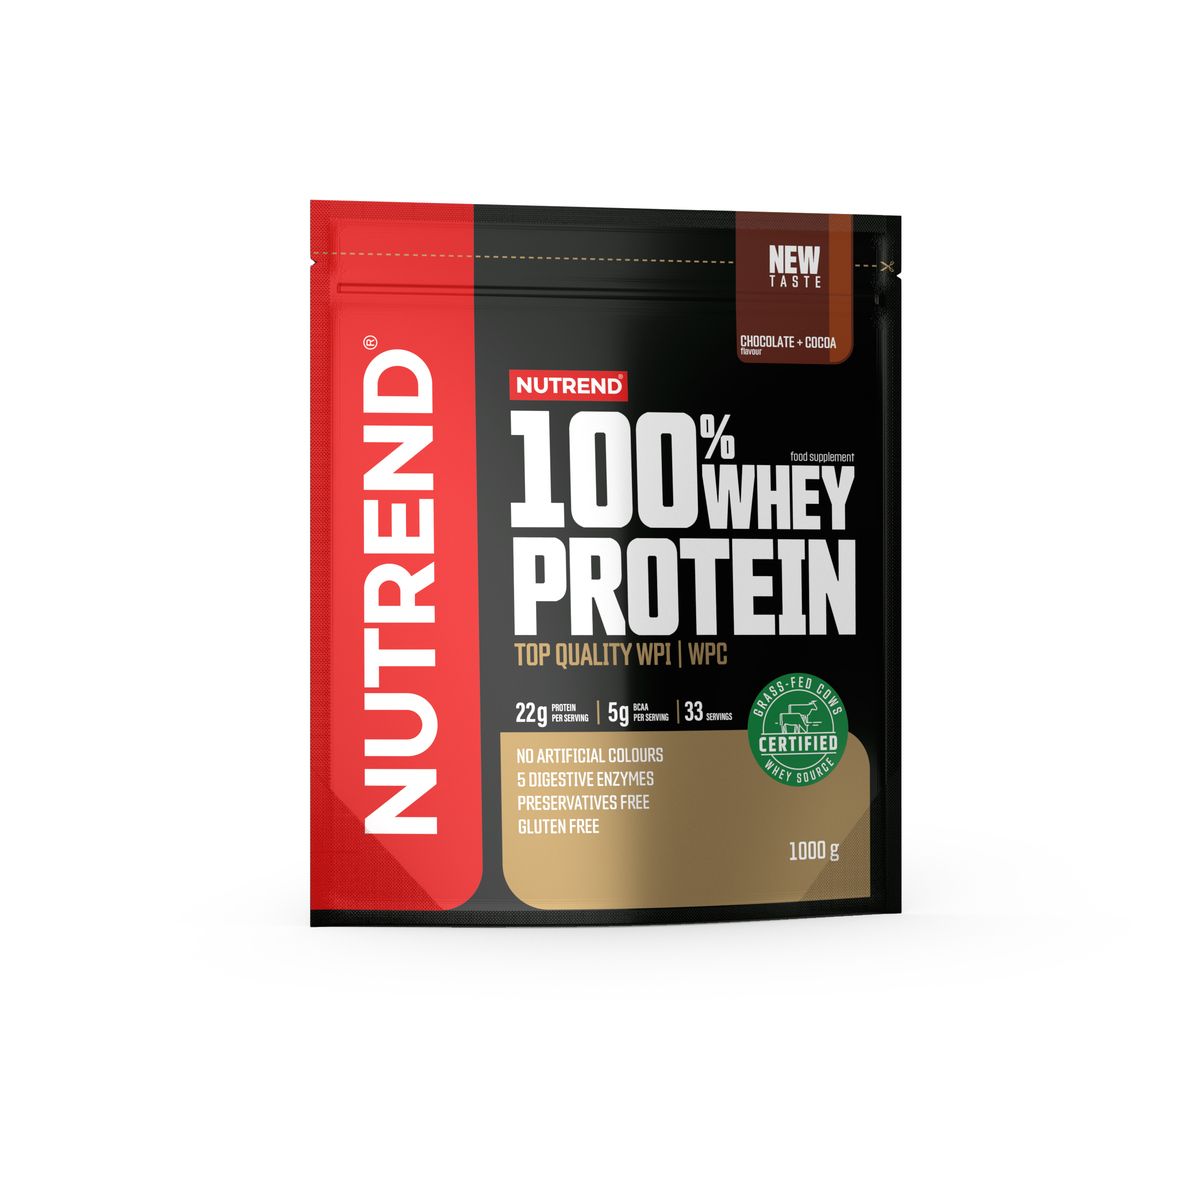 Concentrate Proteice - NUTREND 100% WHEY PROTEIN 1Kg Cookies Cream, advancednutrition.ro